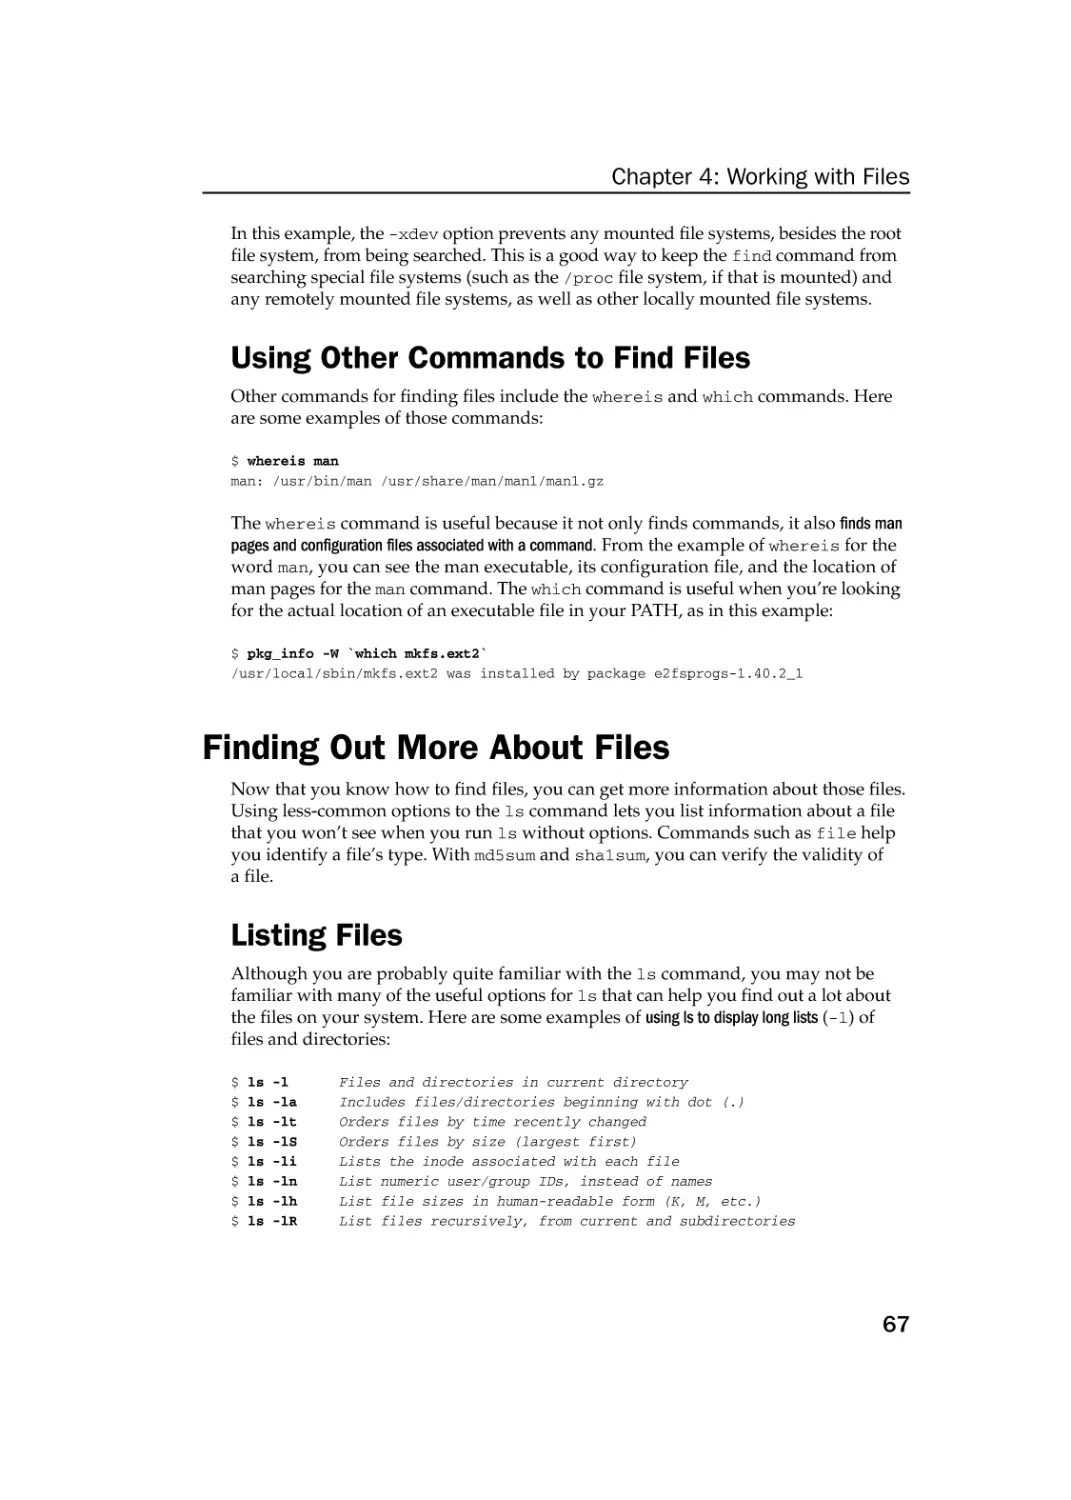 Finding Out More About Files